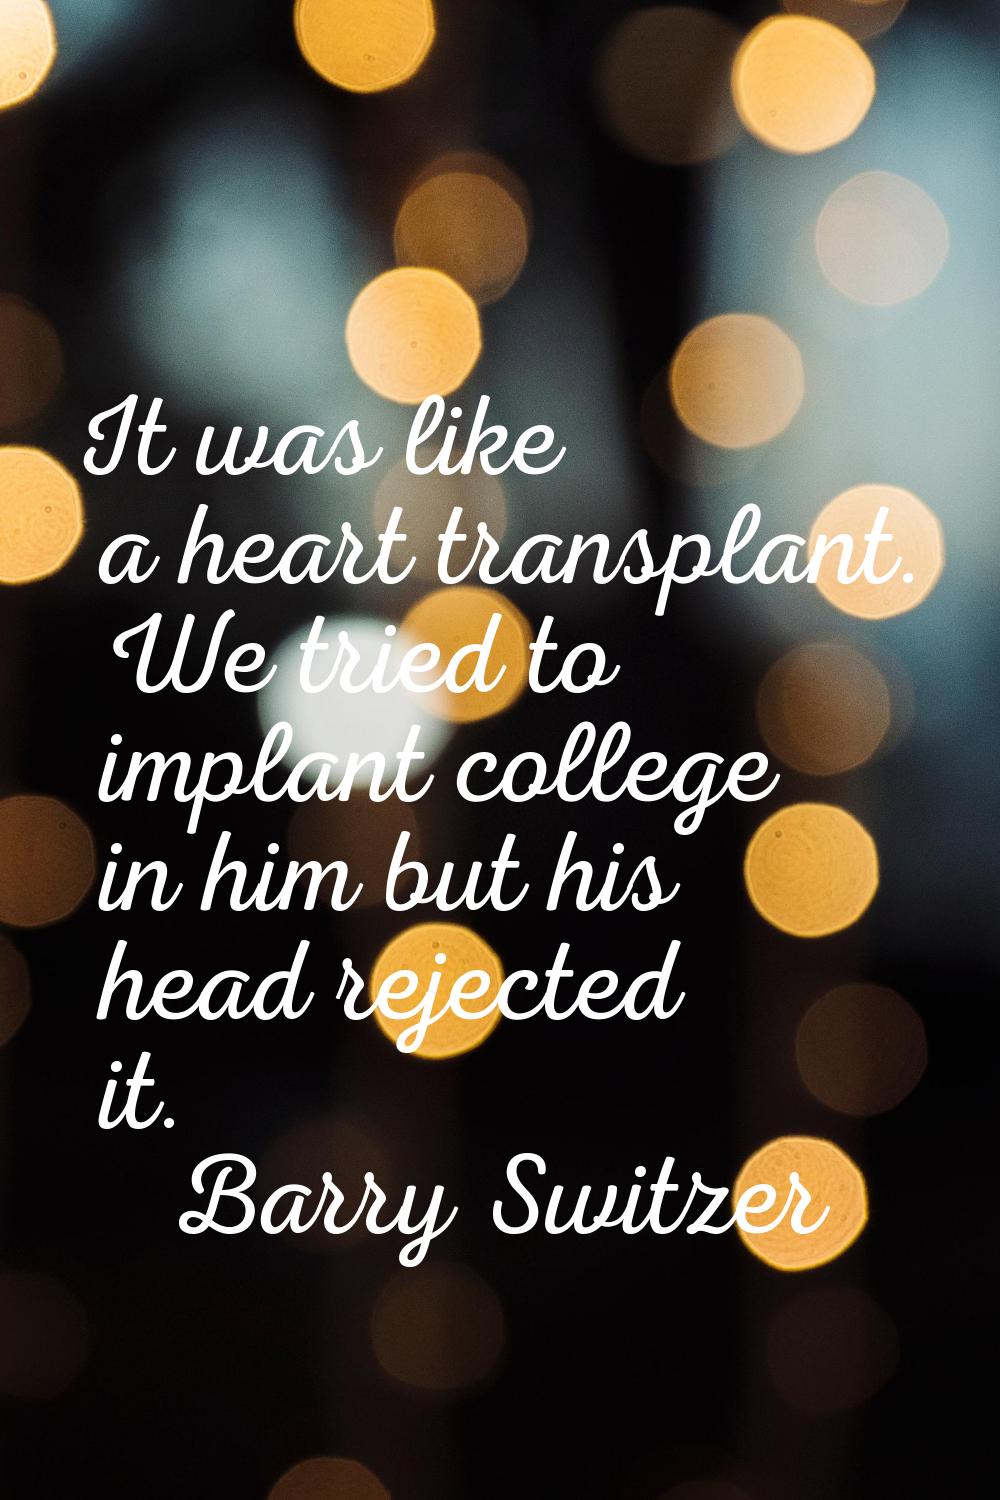 It was like a heart transplant. We tried to implant college in him but his head rejected it.